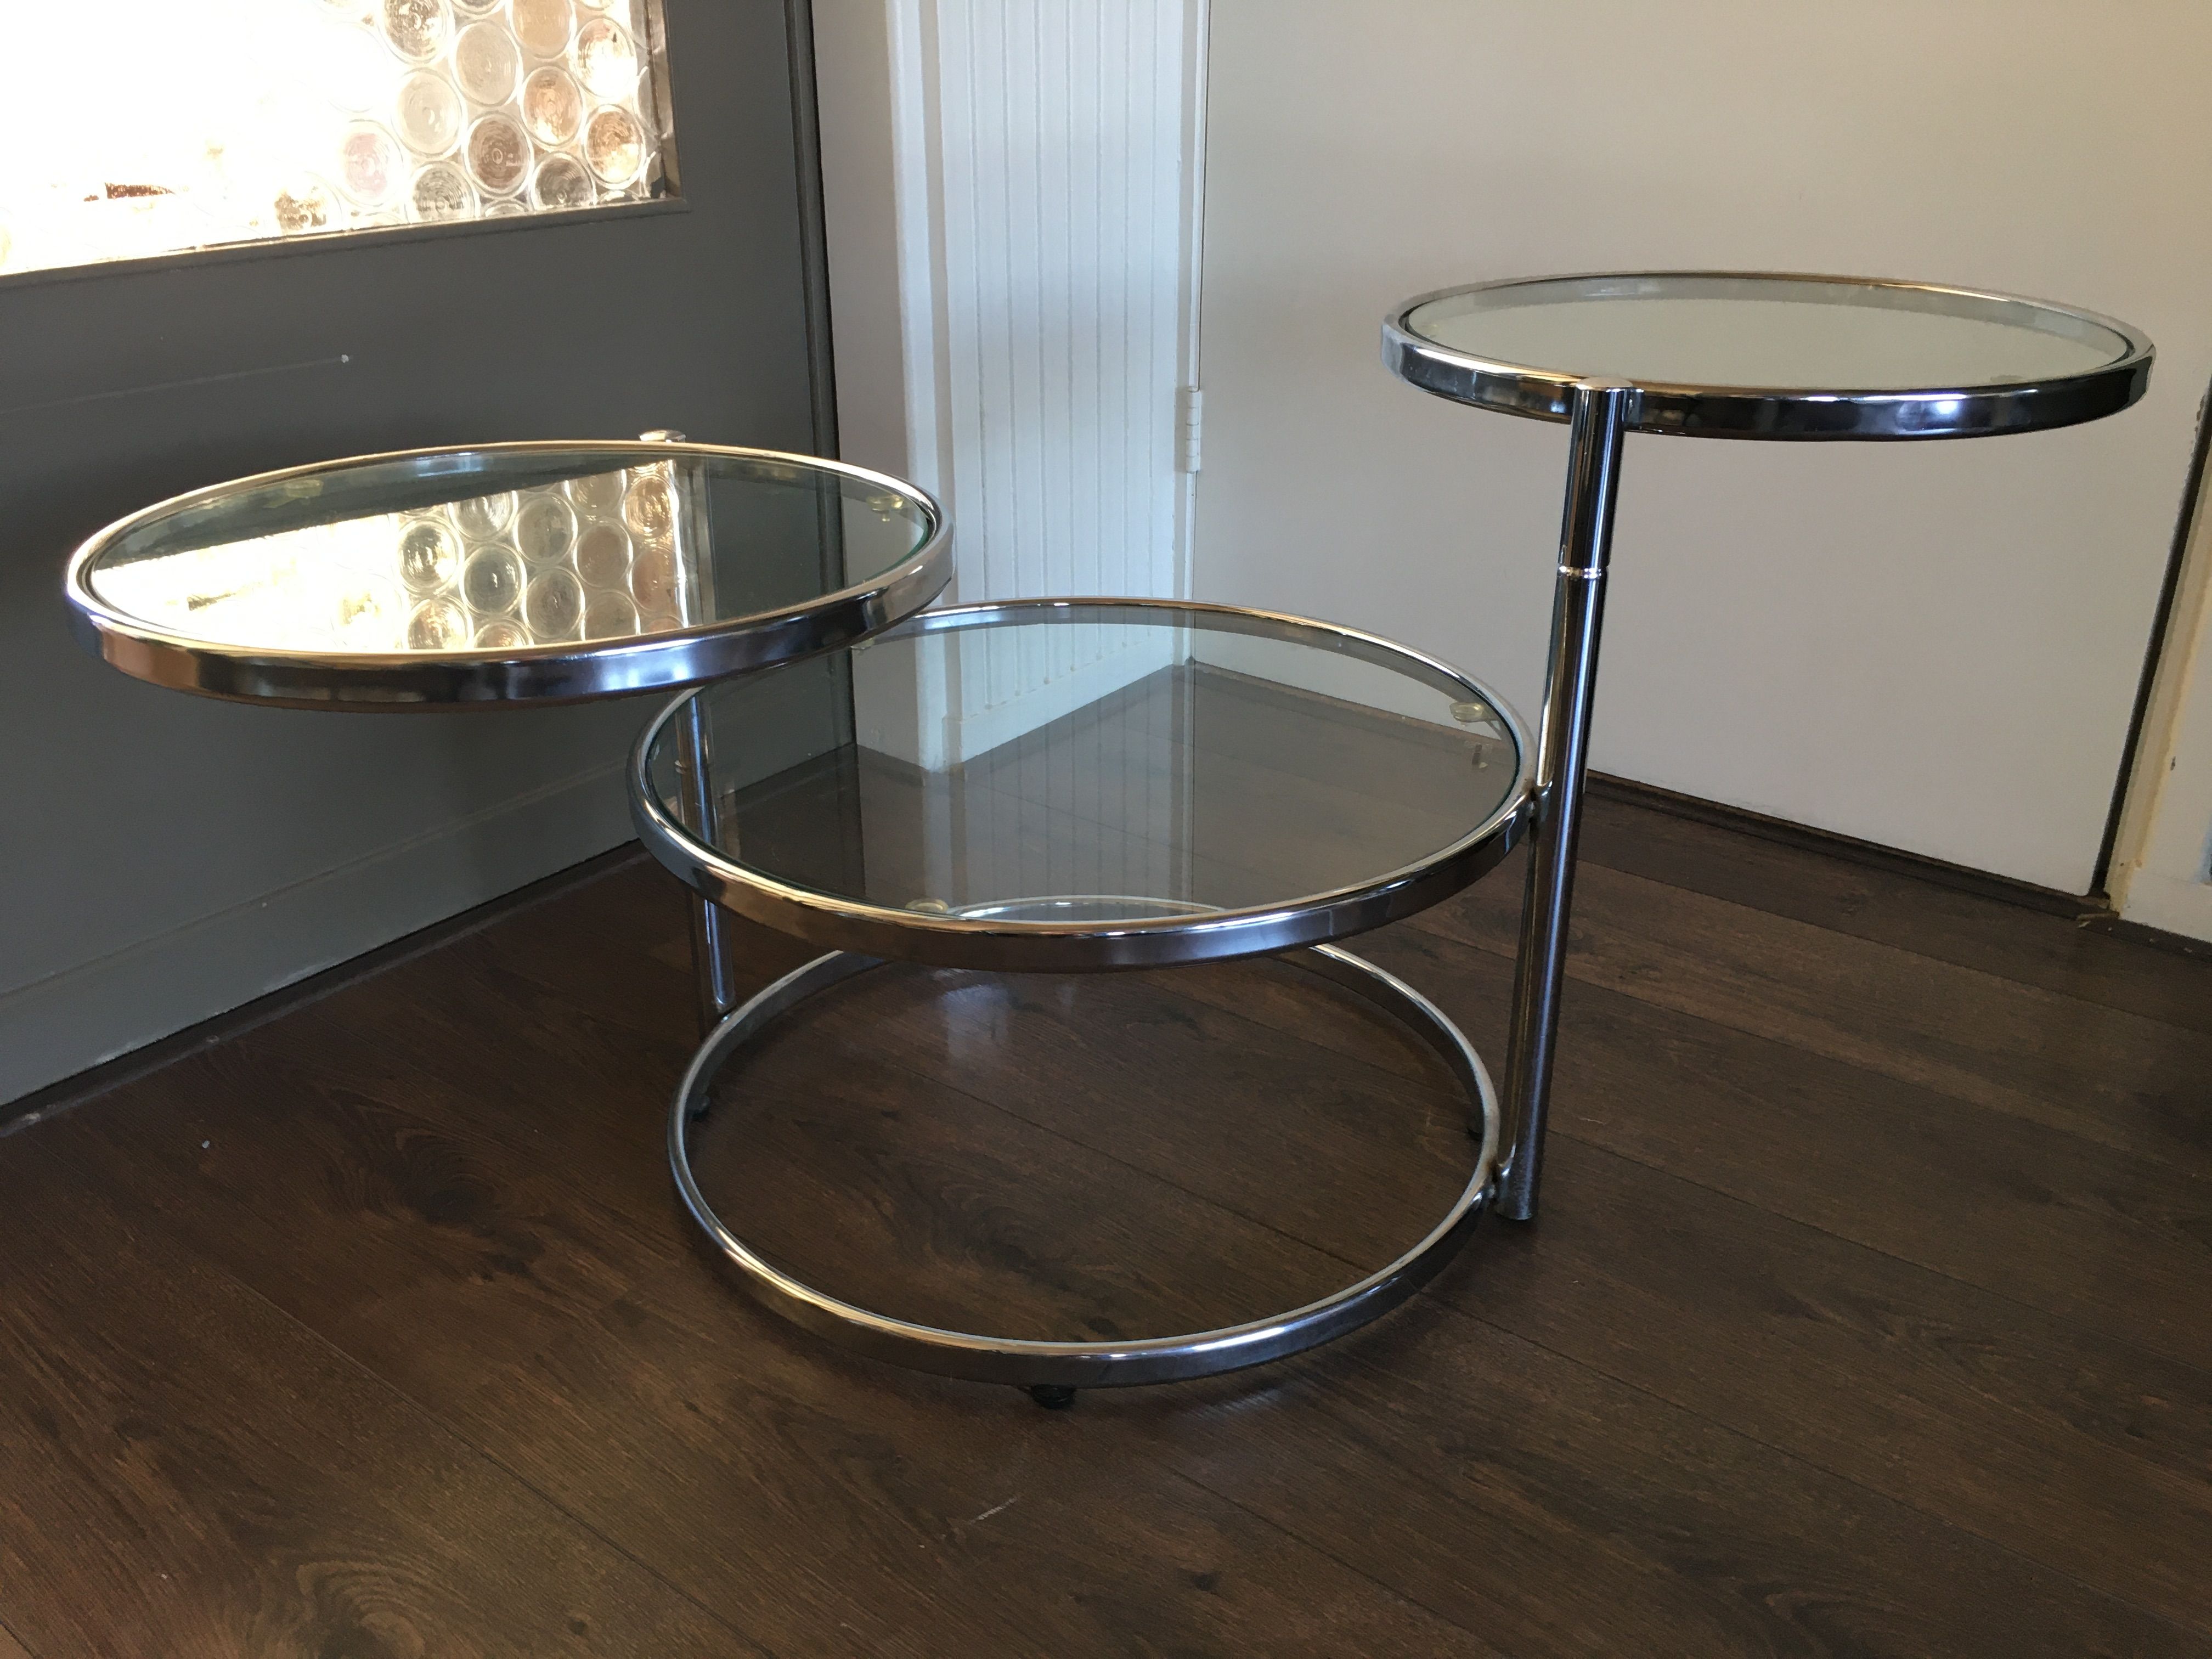 Styles of Vintage Coffee Tables